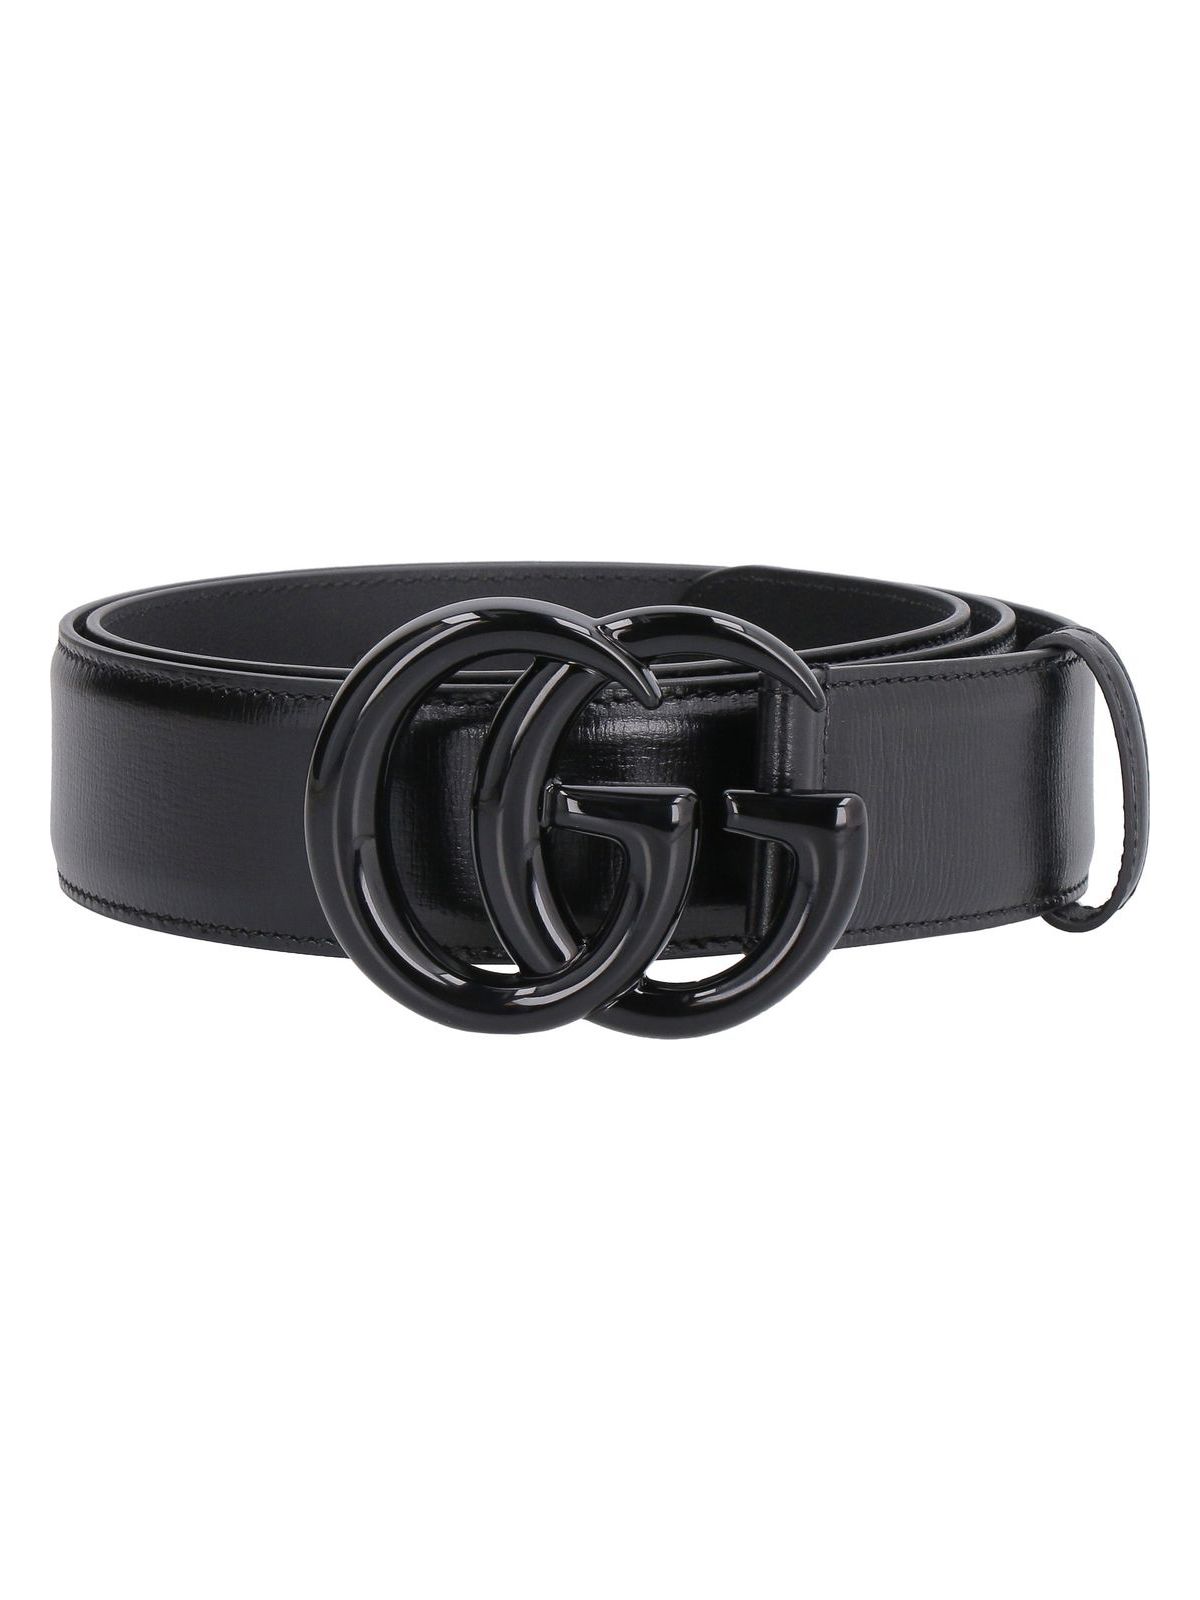 1000 GUCCI GG MARMONT LEATHER BELT